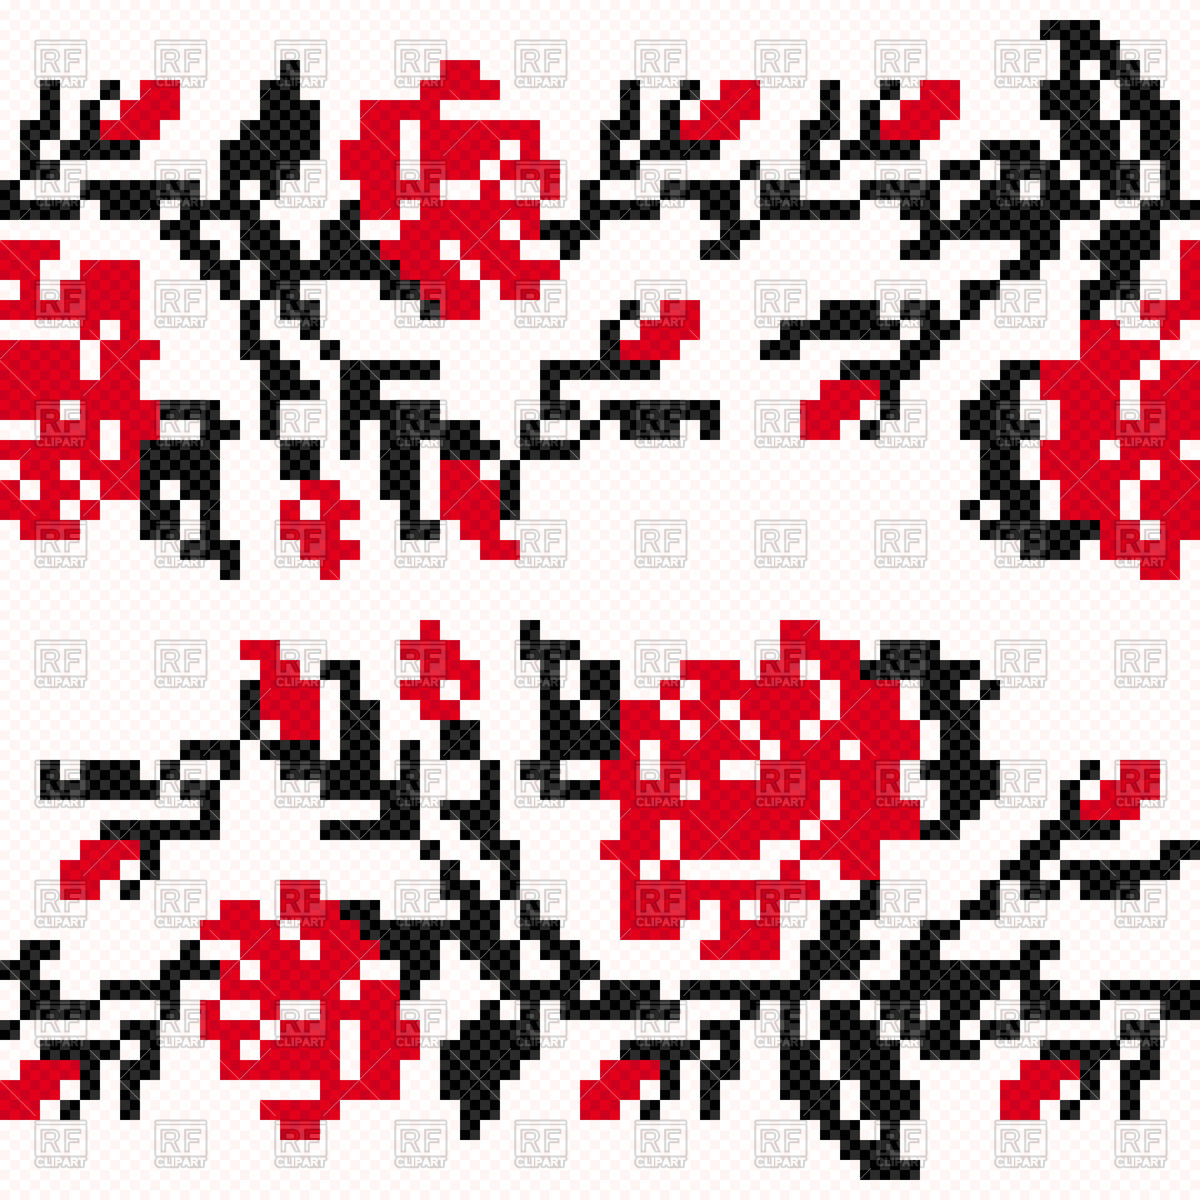 Ethnic Embroidery Patterns Ethnic Ukrainian Embroidery Background In Dark Grey And Red Hues Stock Vector Image